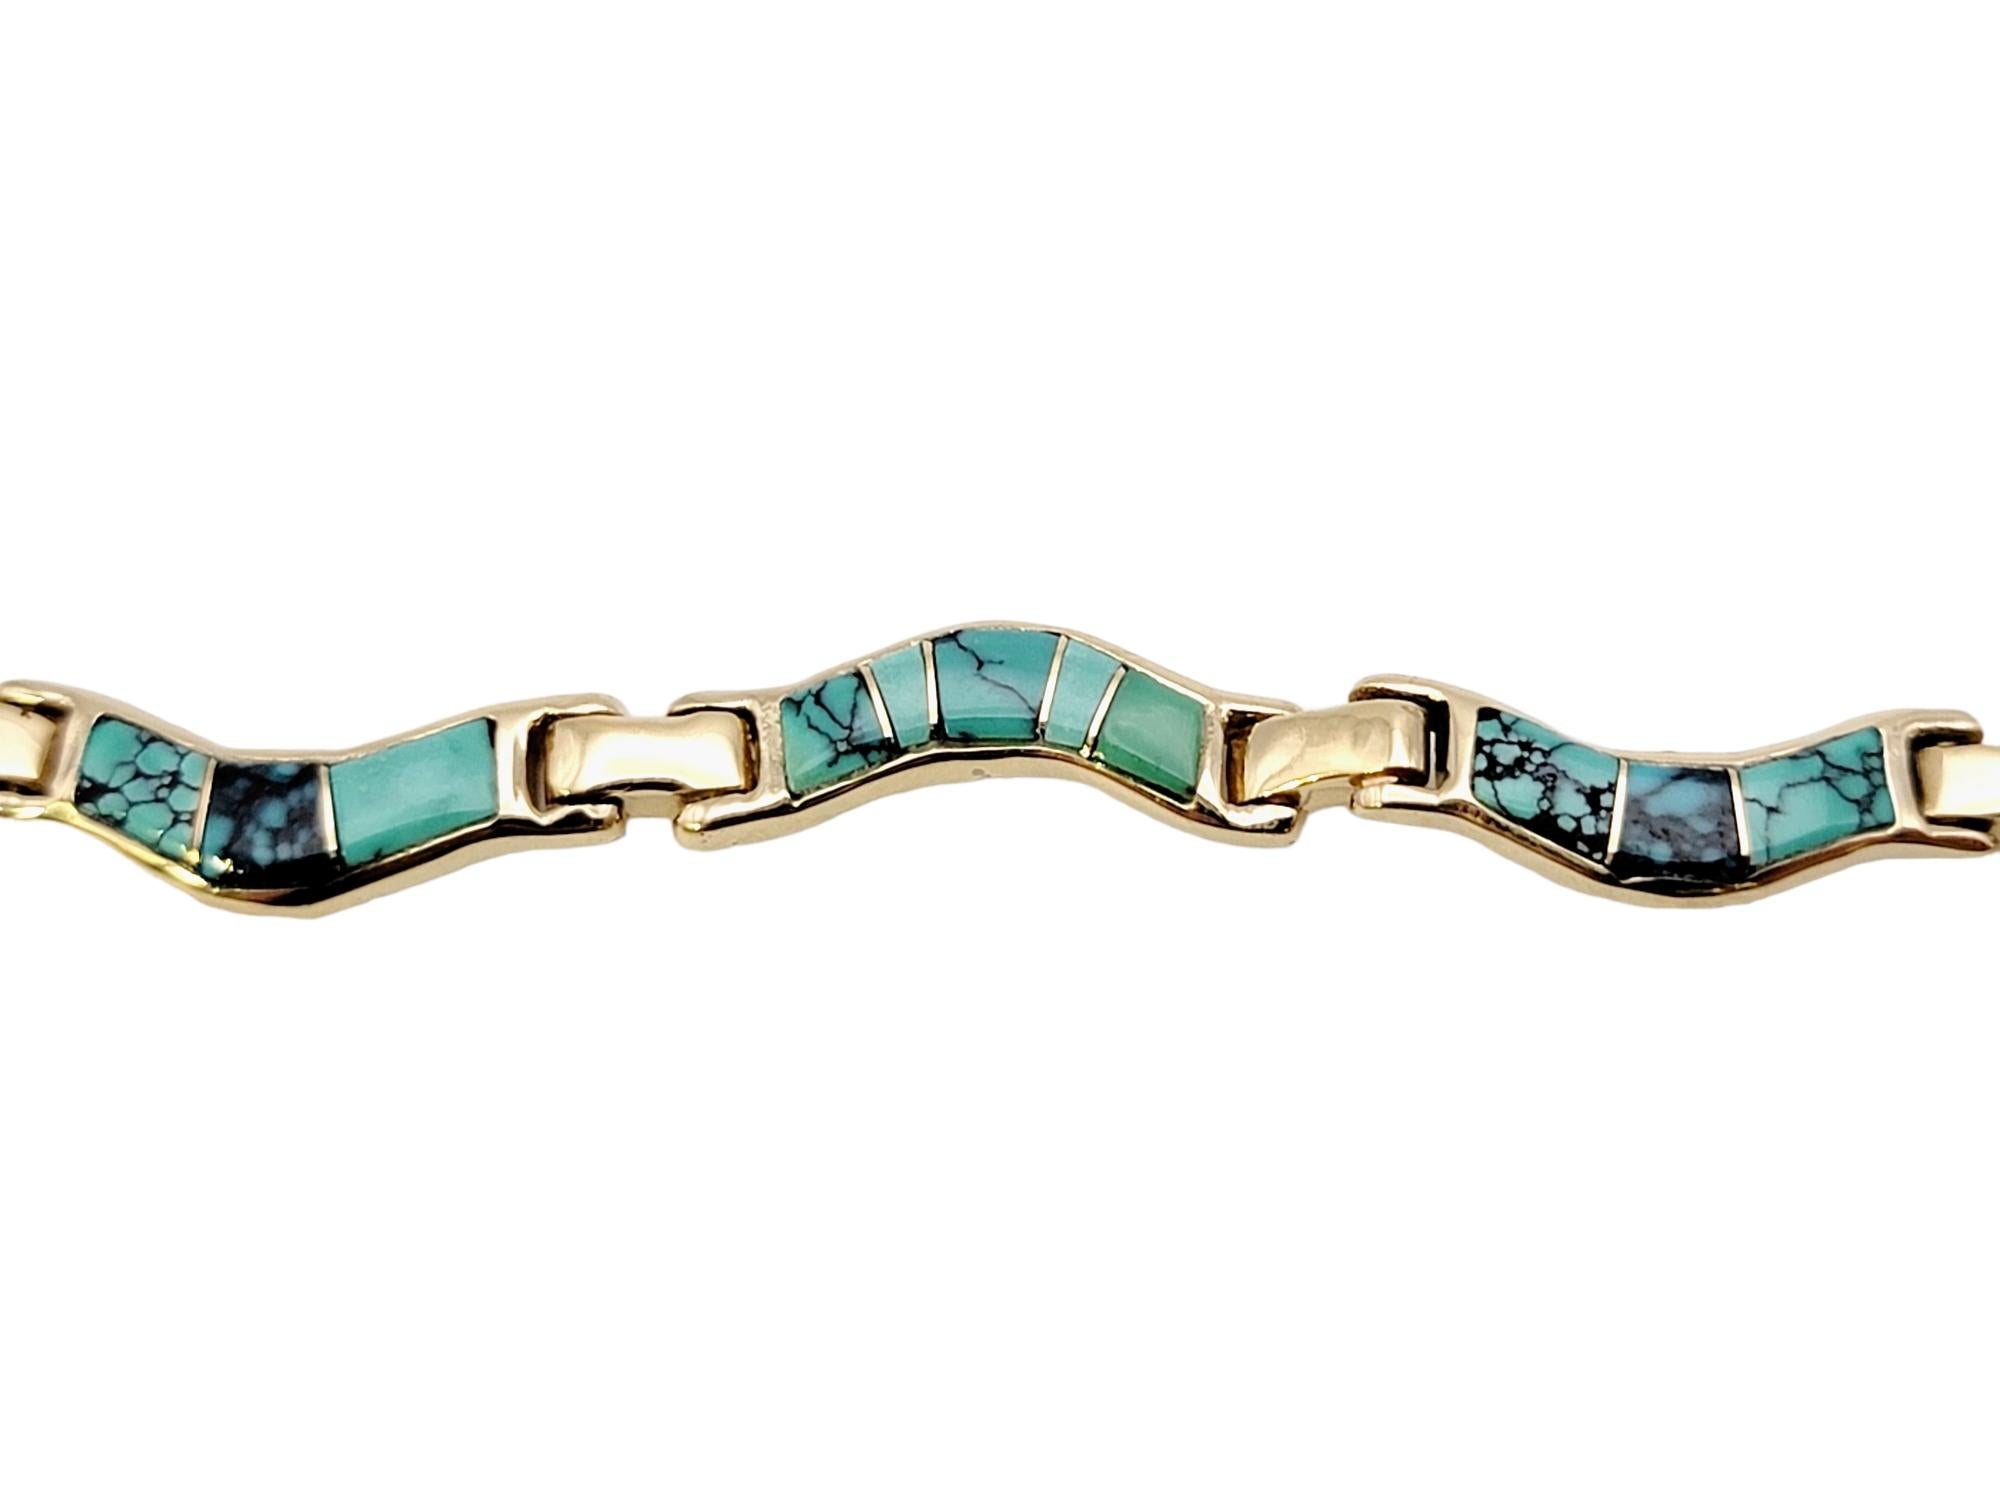 Natural Turquoise Inlay Wavy Link Bracelet in Polished 14 Karat Yellow Gold In Good Condition For Sale In Scottsdale, AZ